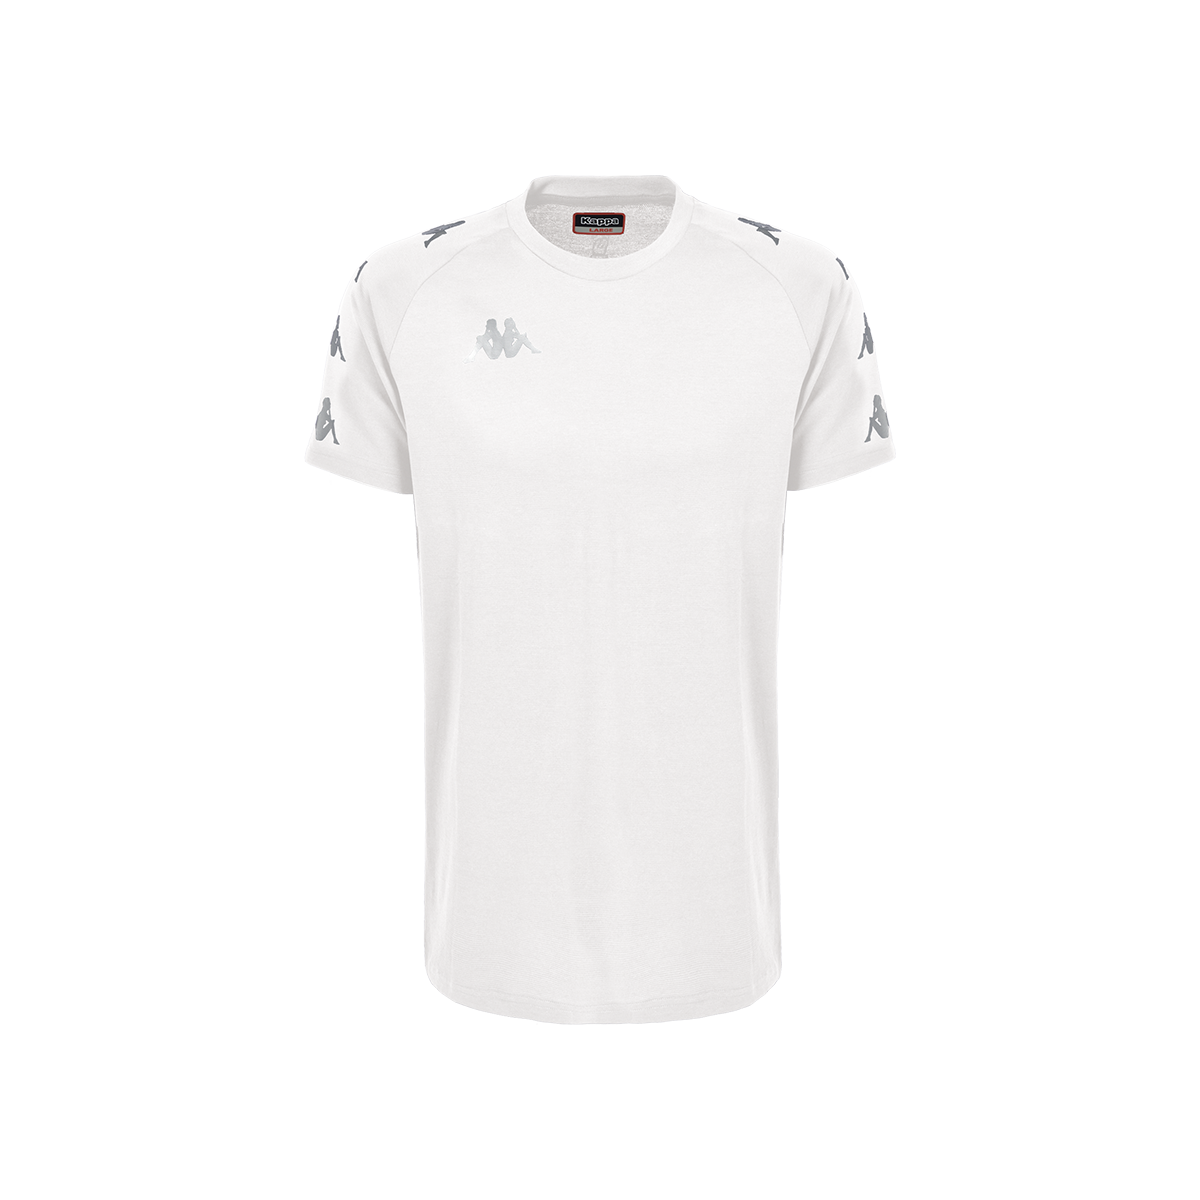 T-shirt Ancone Homme - image 1